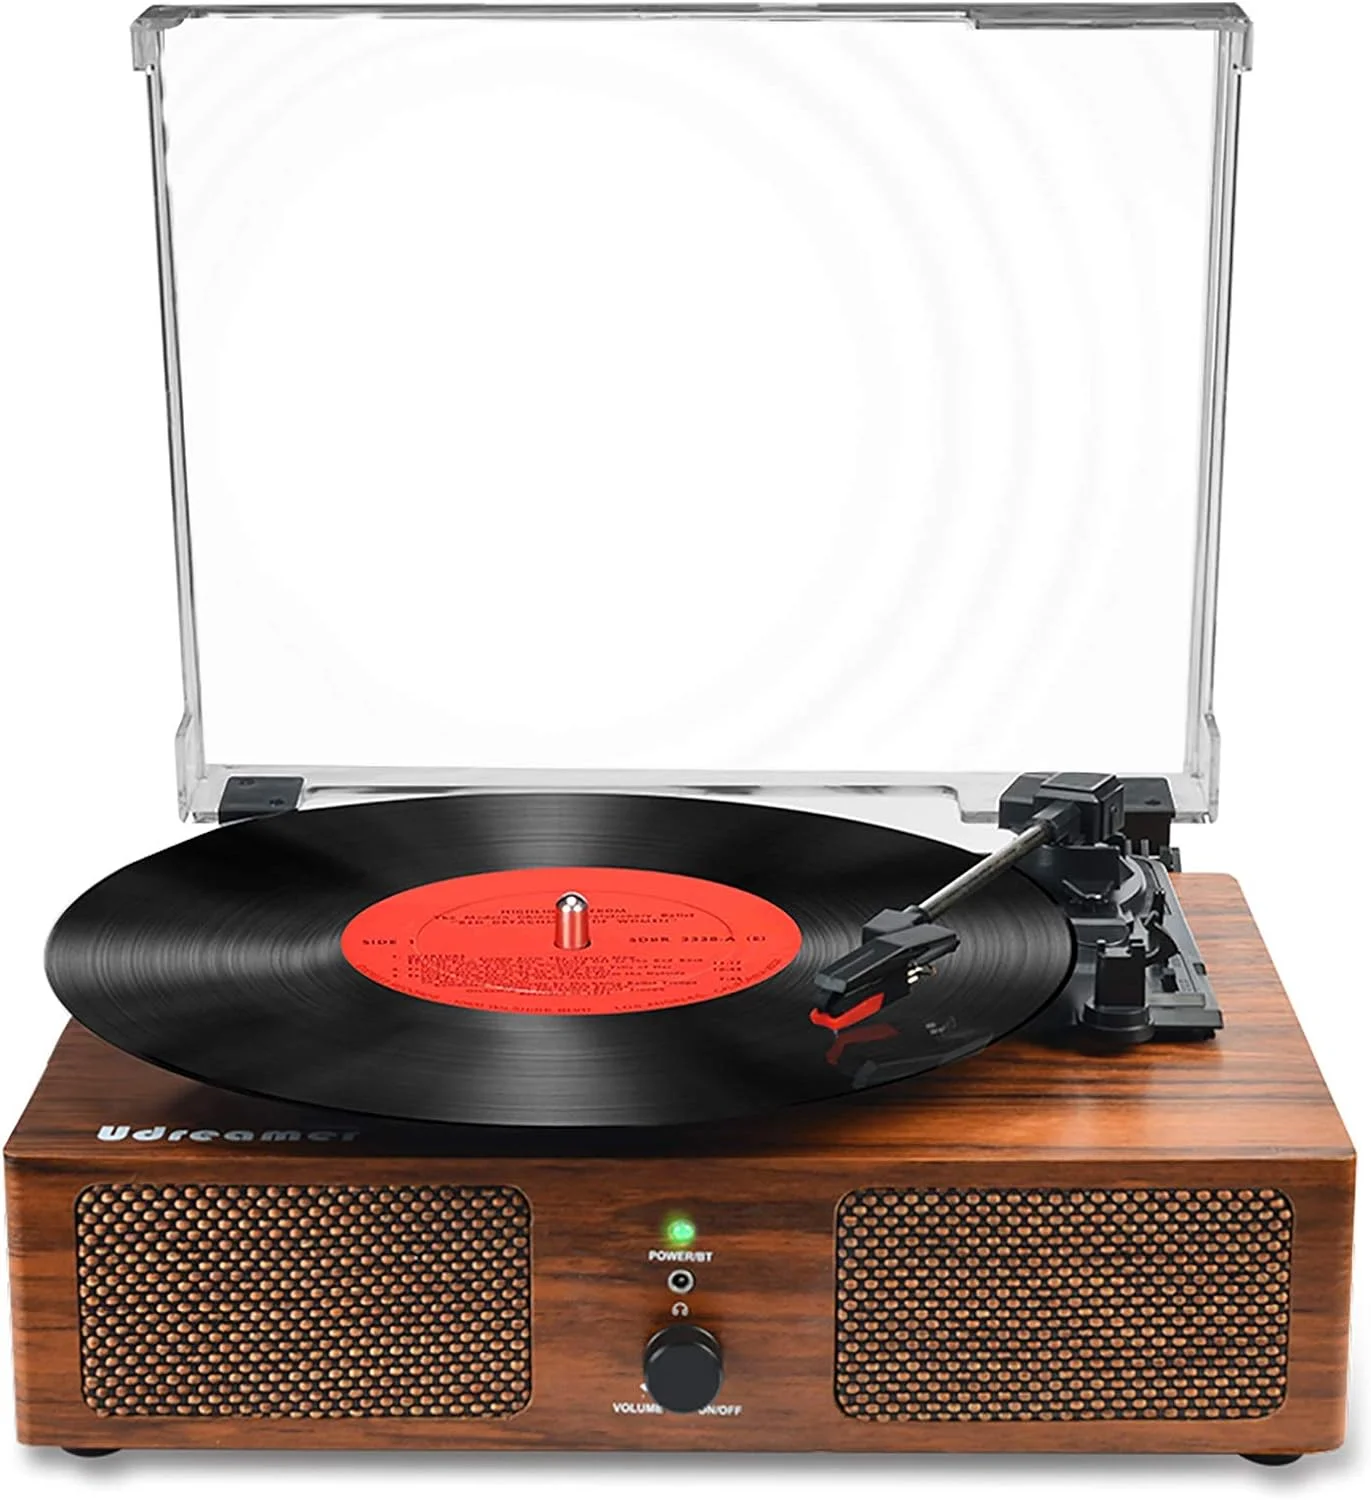 Vinyl Record Player Wireless Turntable Review